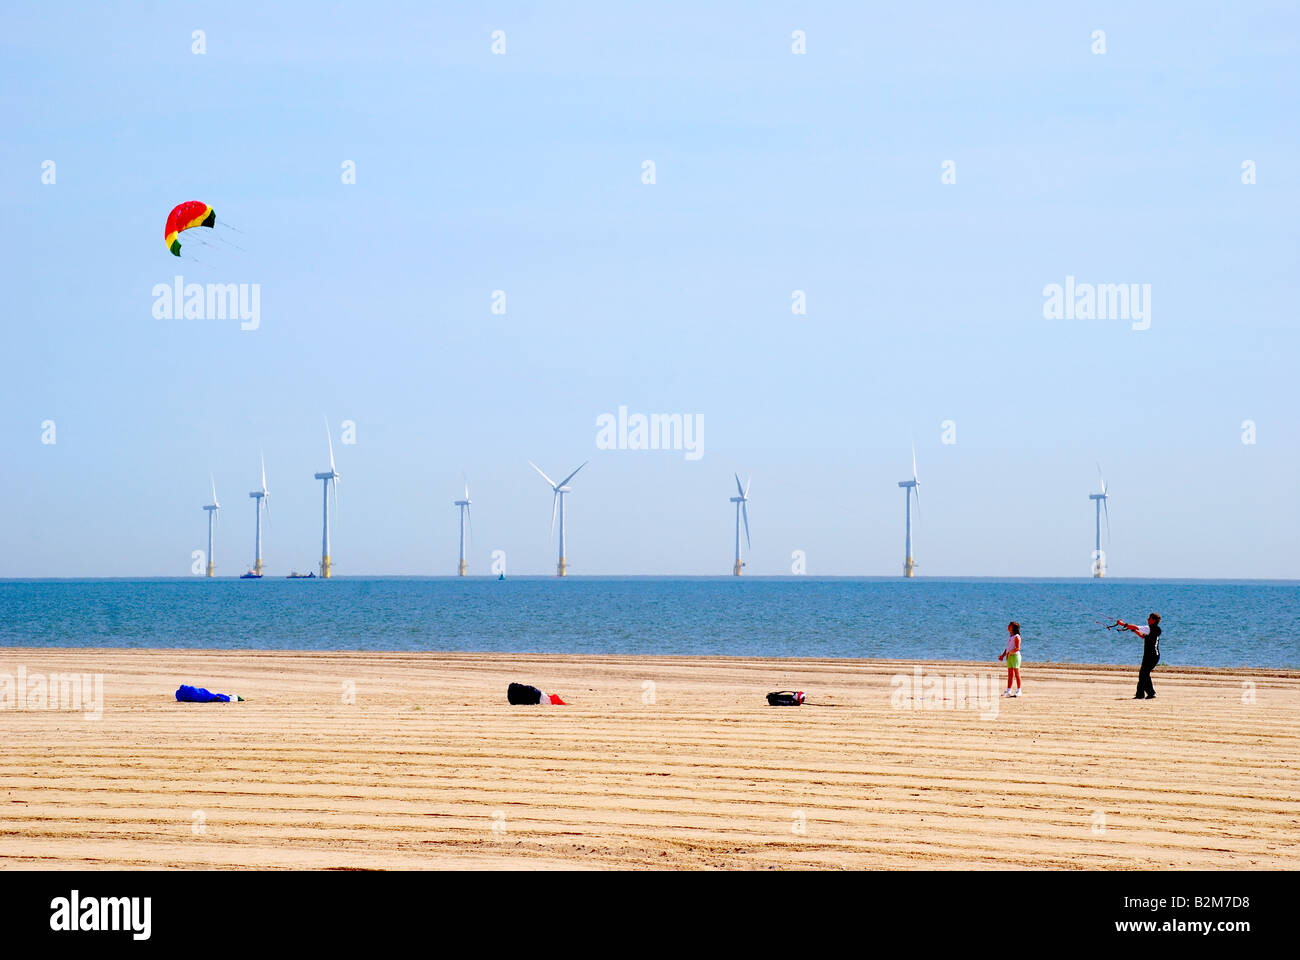 Kite flying on Great Yarmouth Beach showing offshore wind turbines,  Great Yarmouth, Norfolk, England, United Kingdom Stock Photo